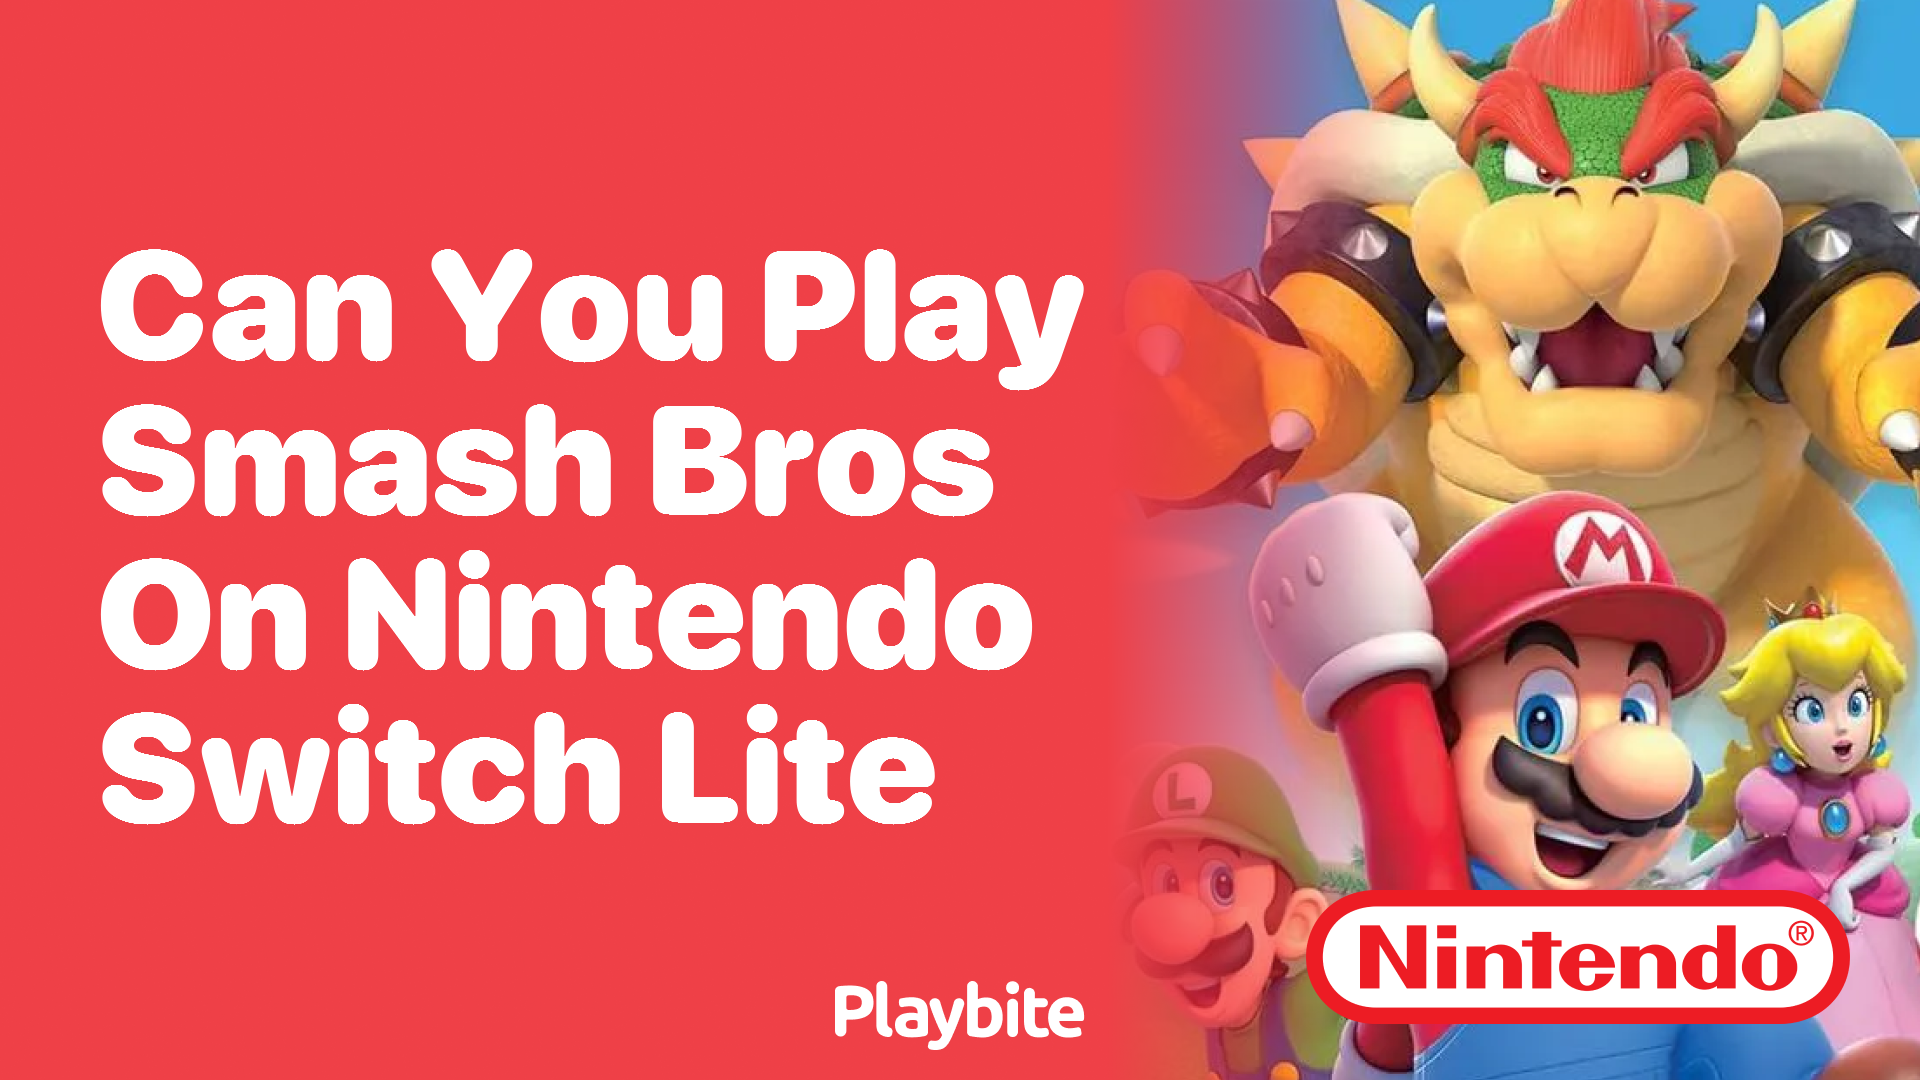 Can You Play Smash Bros on Nintendo Switch Lite?